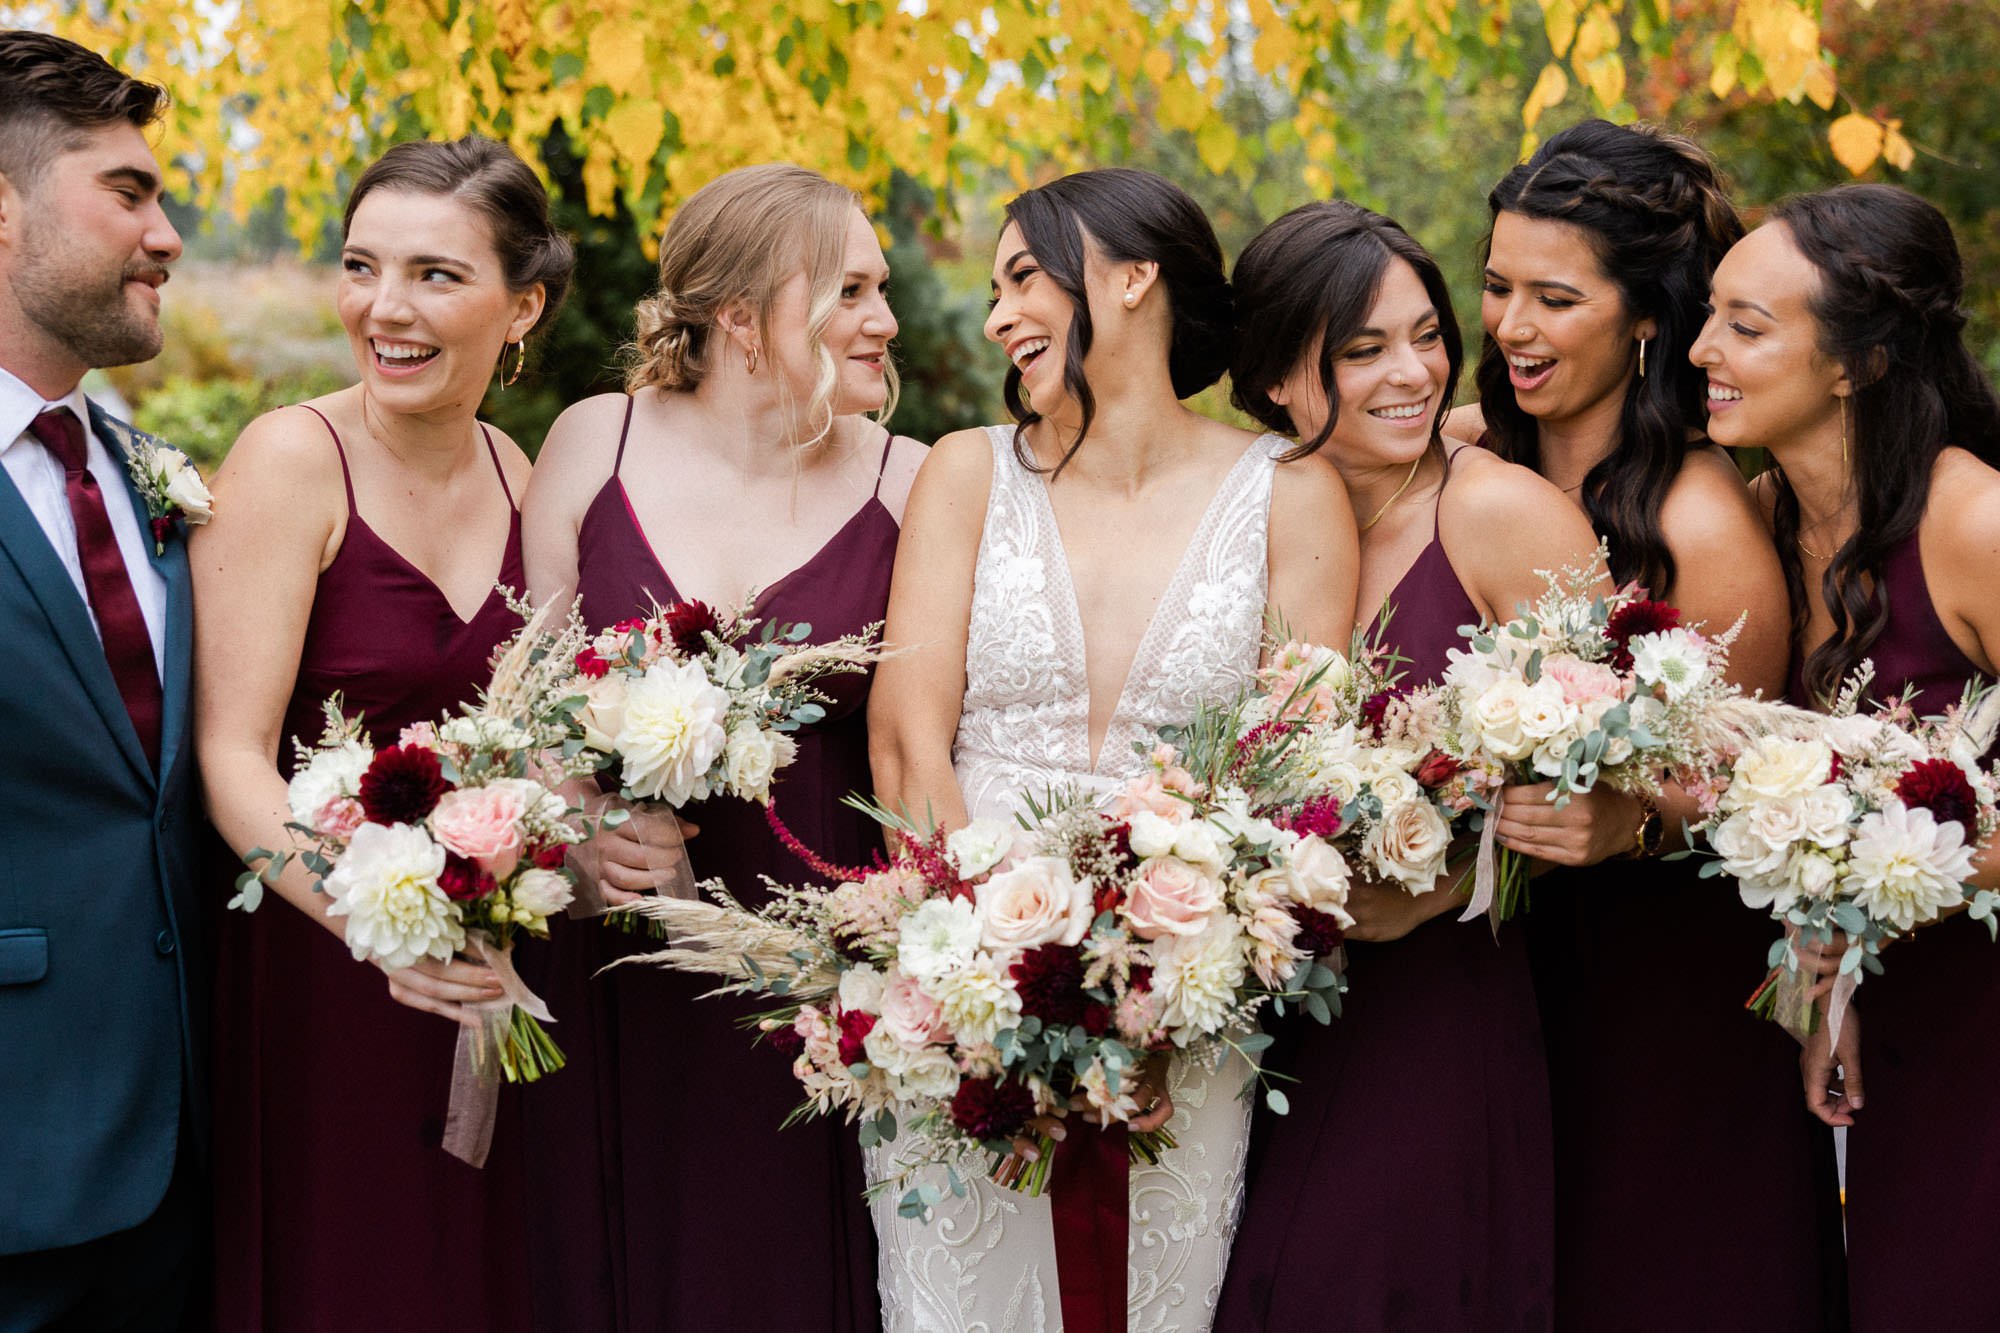 bride and six bridesmaids holding floral bouquets look at and smile at one another